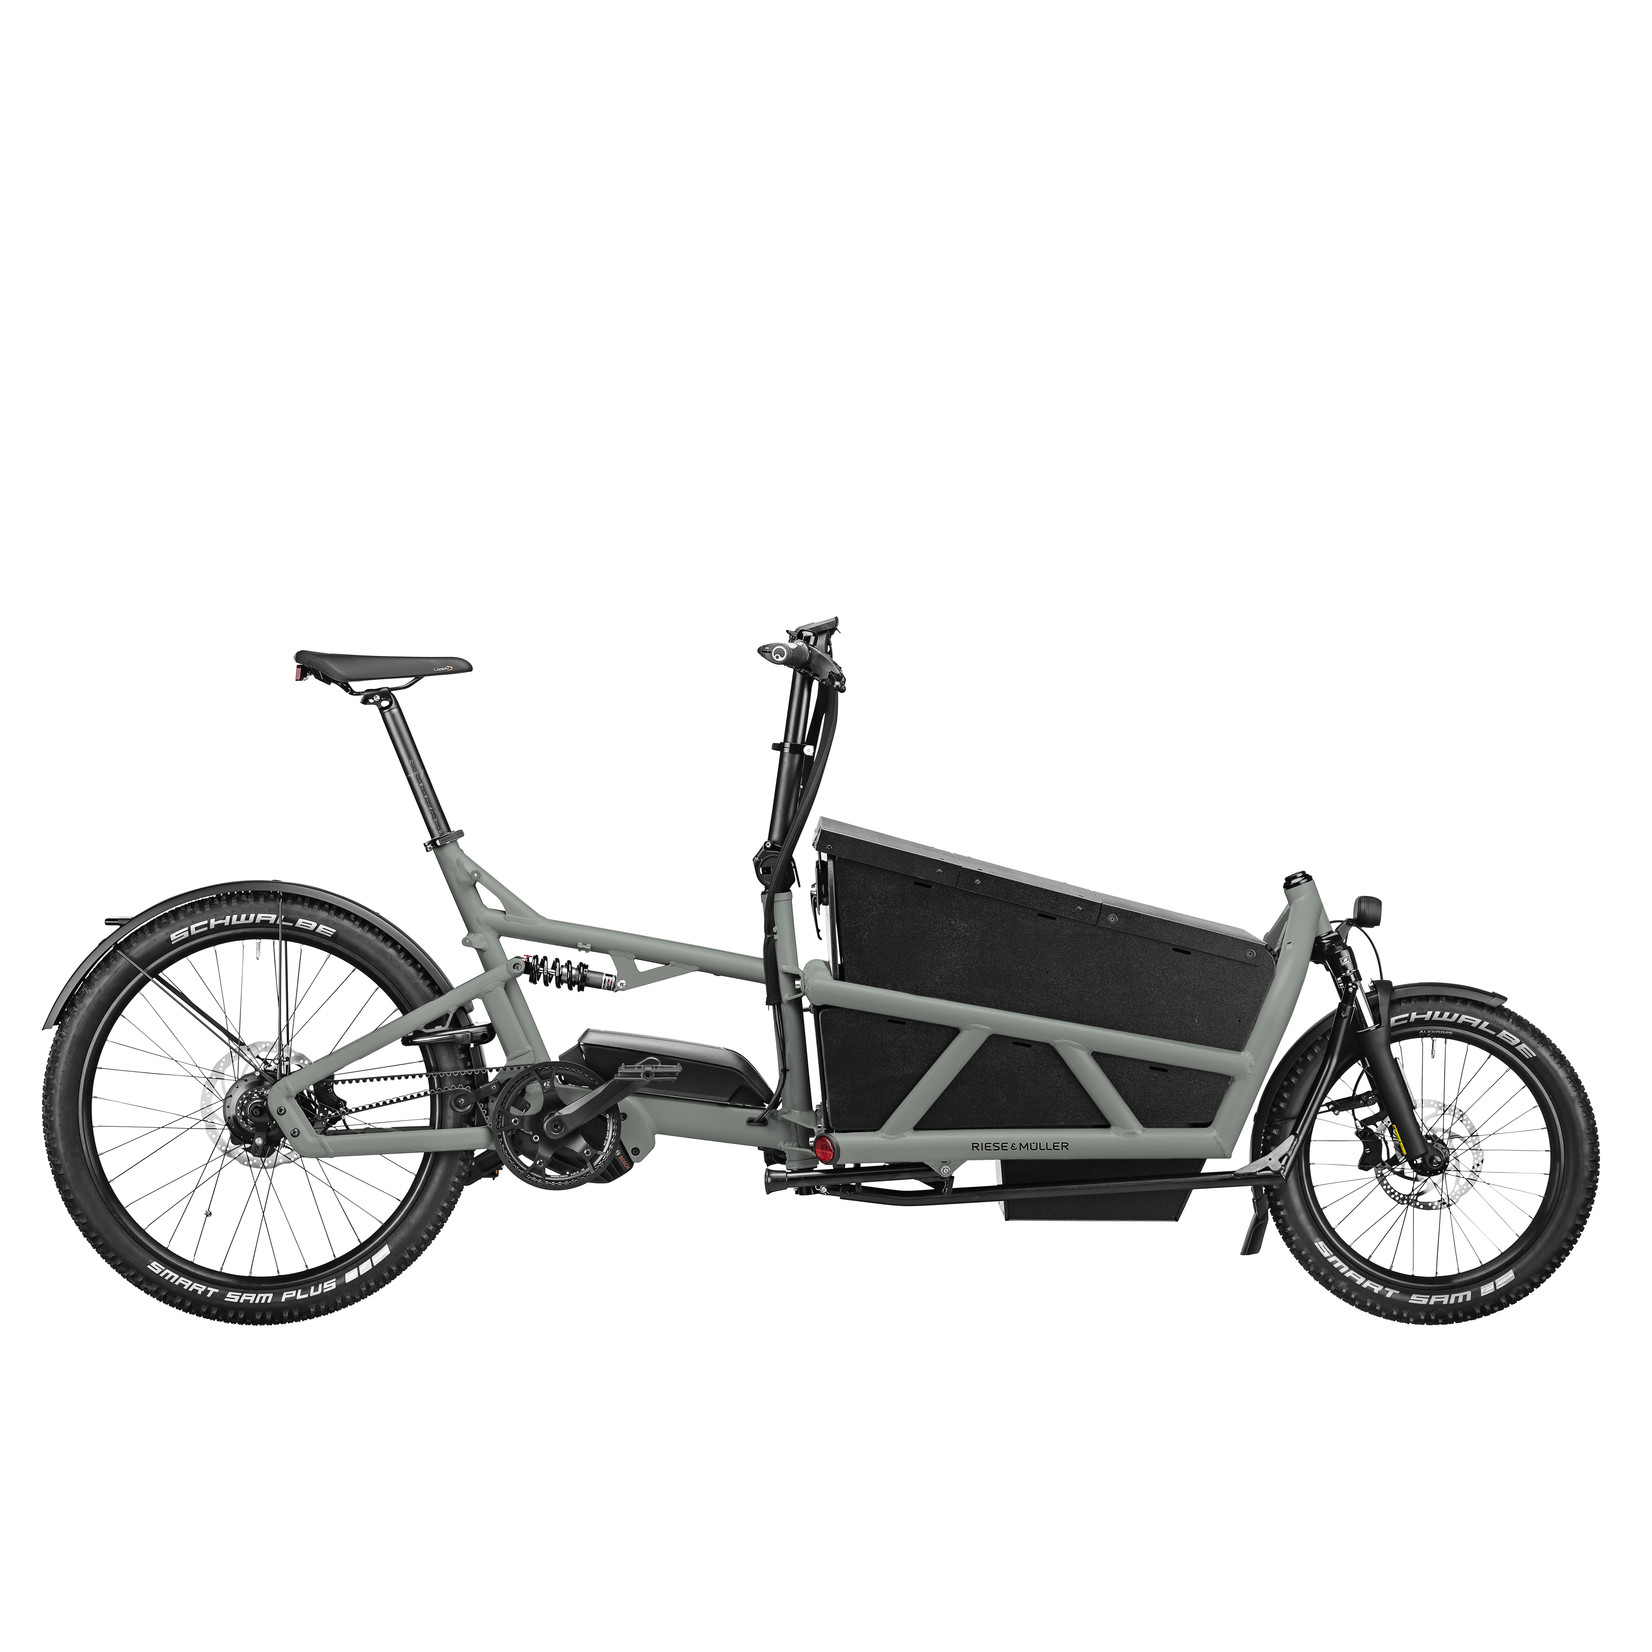 Riese & Muller Load 60 Rohloff, Tundra Grey Matt, with Carrier, Chain lock and Bag